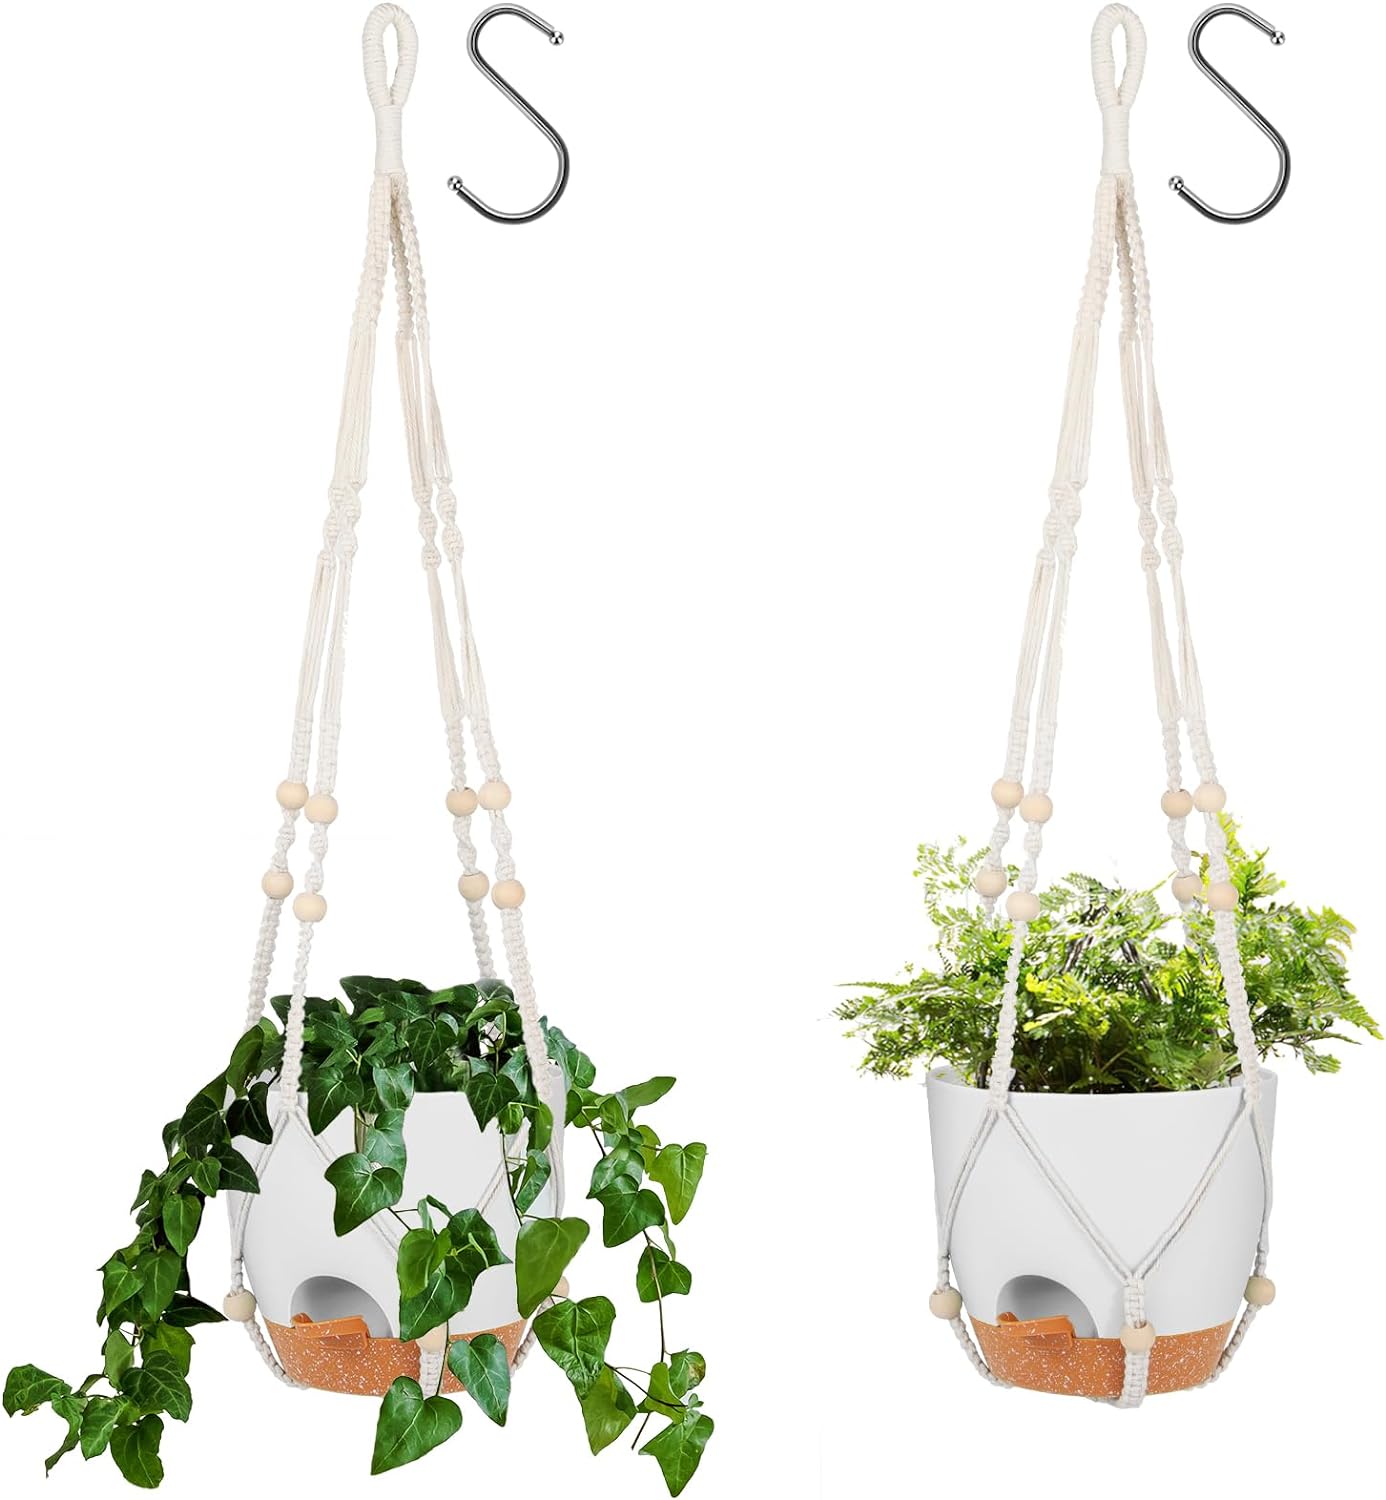 GARDIFE 8 Inch Hanging Planters with Macrame Plant Hanger for Indoor and Outdoor Plants, 2 Pack Large Self Watering Hanging Plant Pot with Basket Flower Pot with Drainage Hole, White